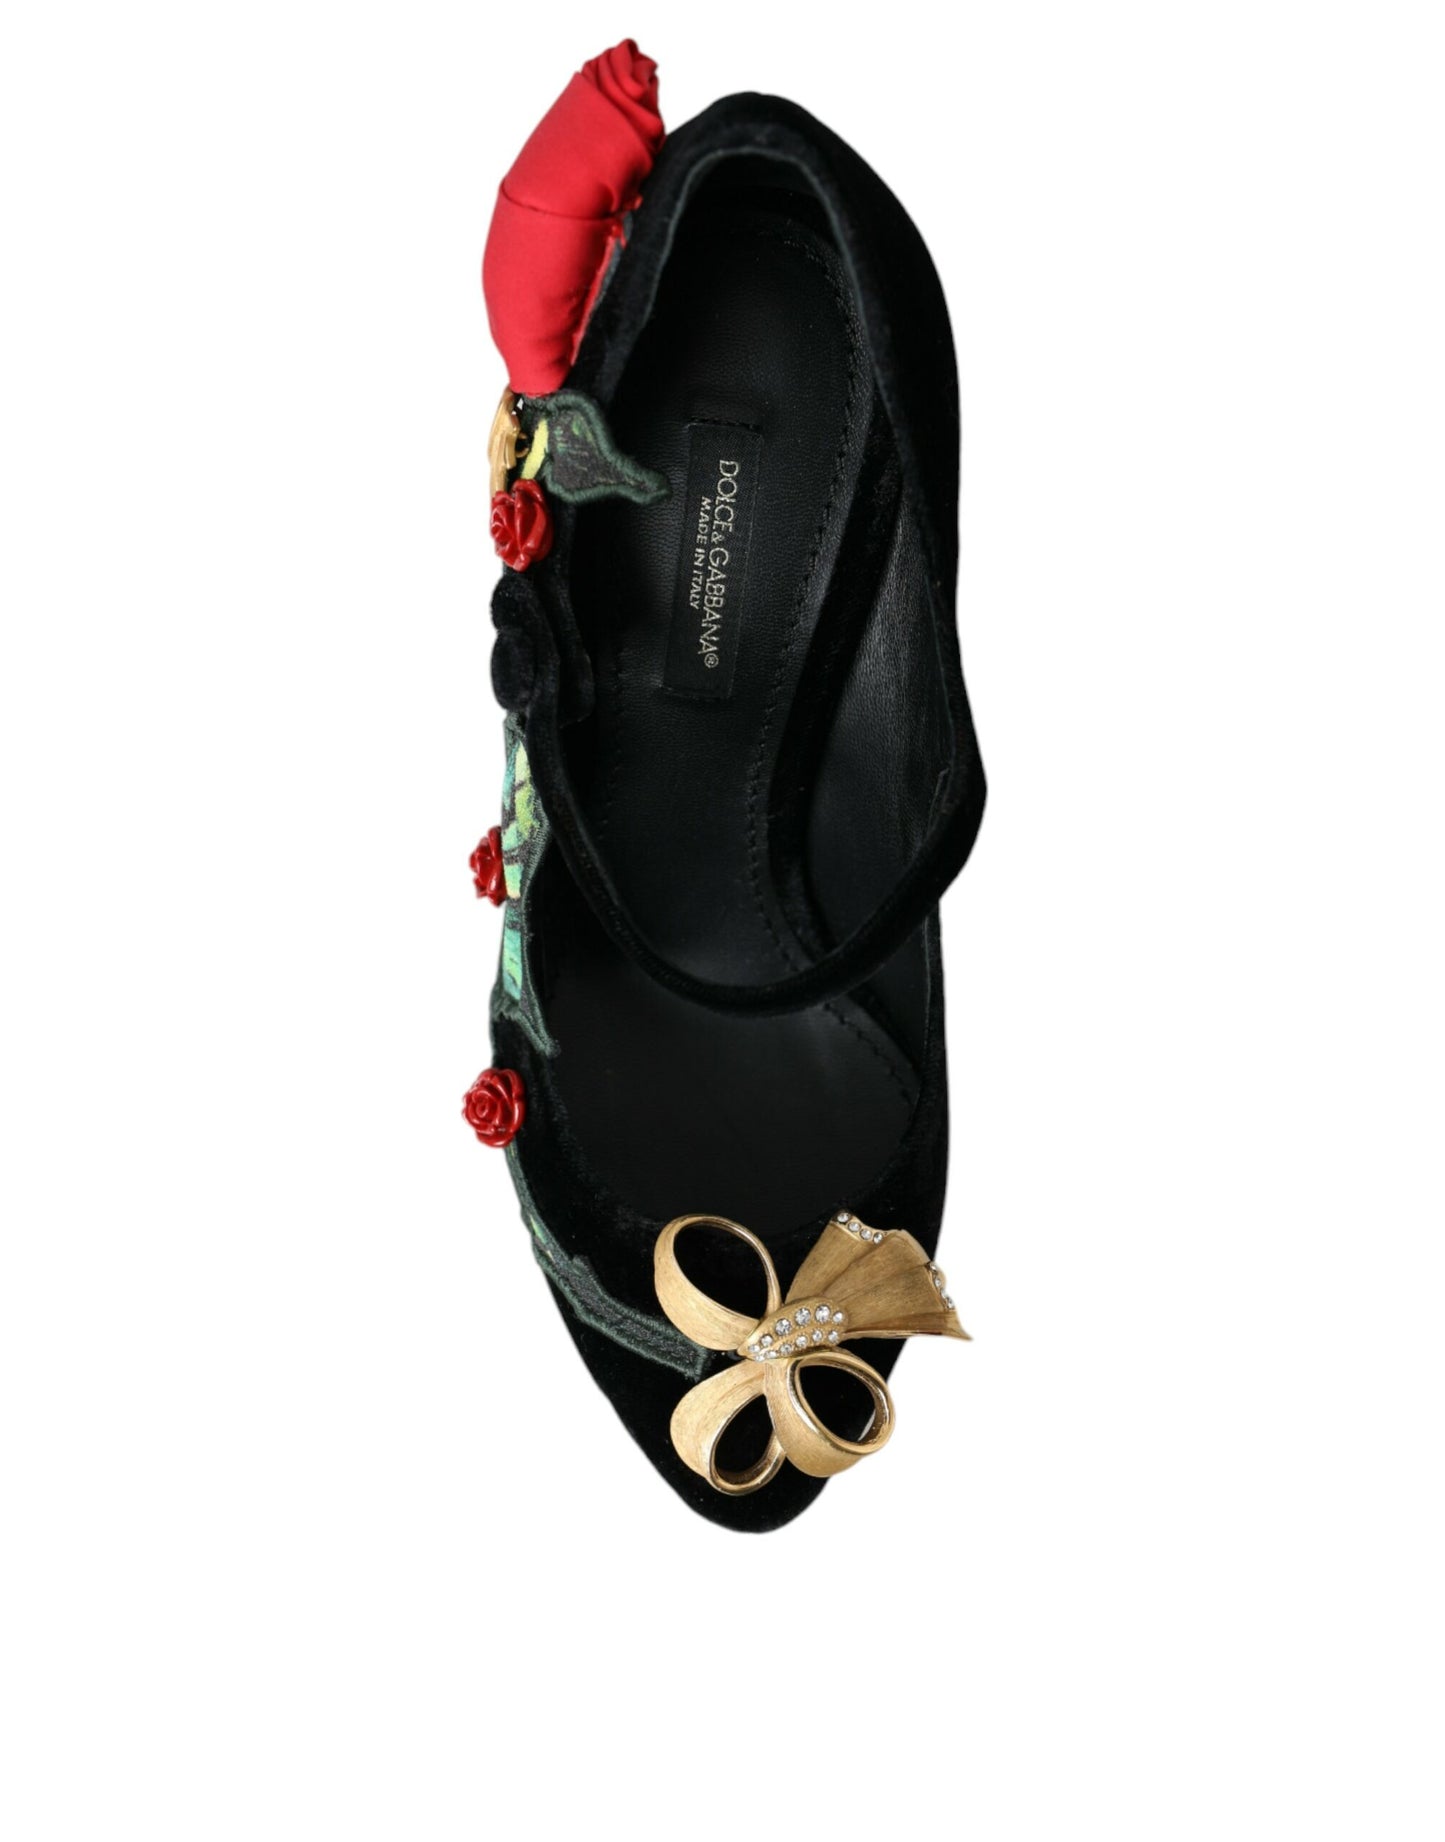 Black Roses Crystal Brooch Mary Jane Shoes